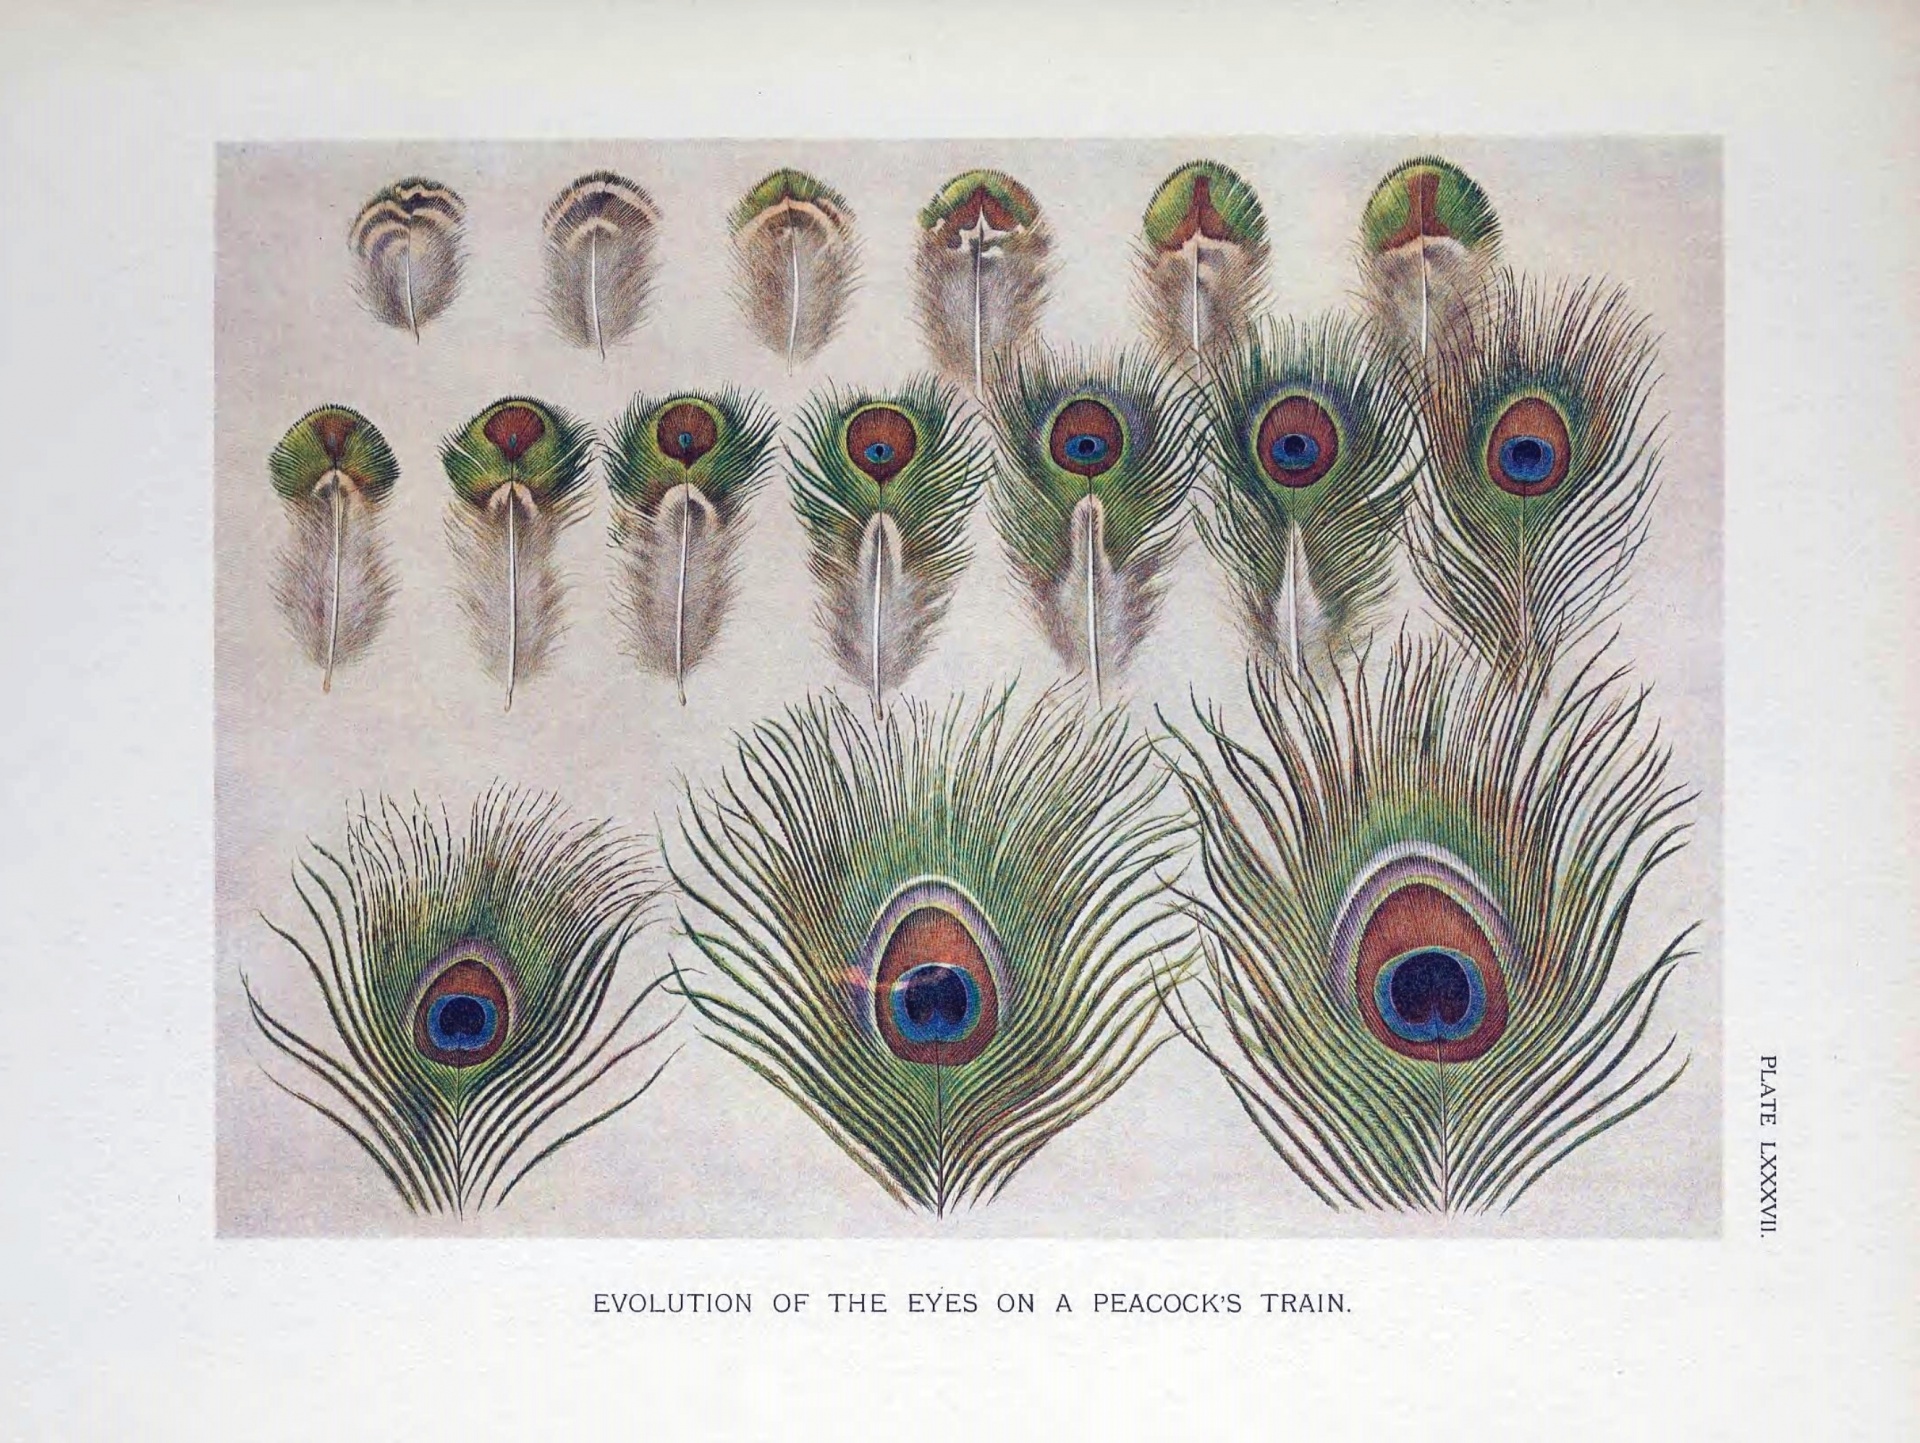 Peacock feathers peacock feather vintage old ornithology ornithology blackboard biology poster illustration drawing plumage public domain graphic